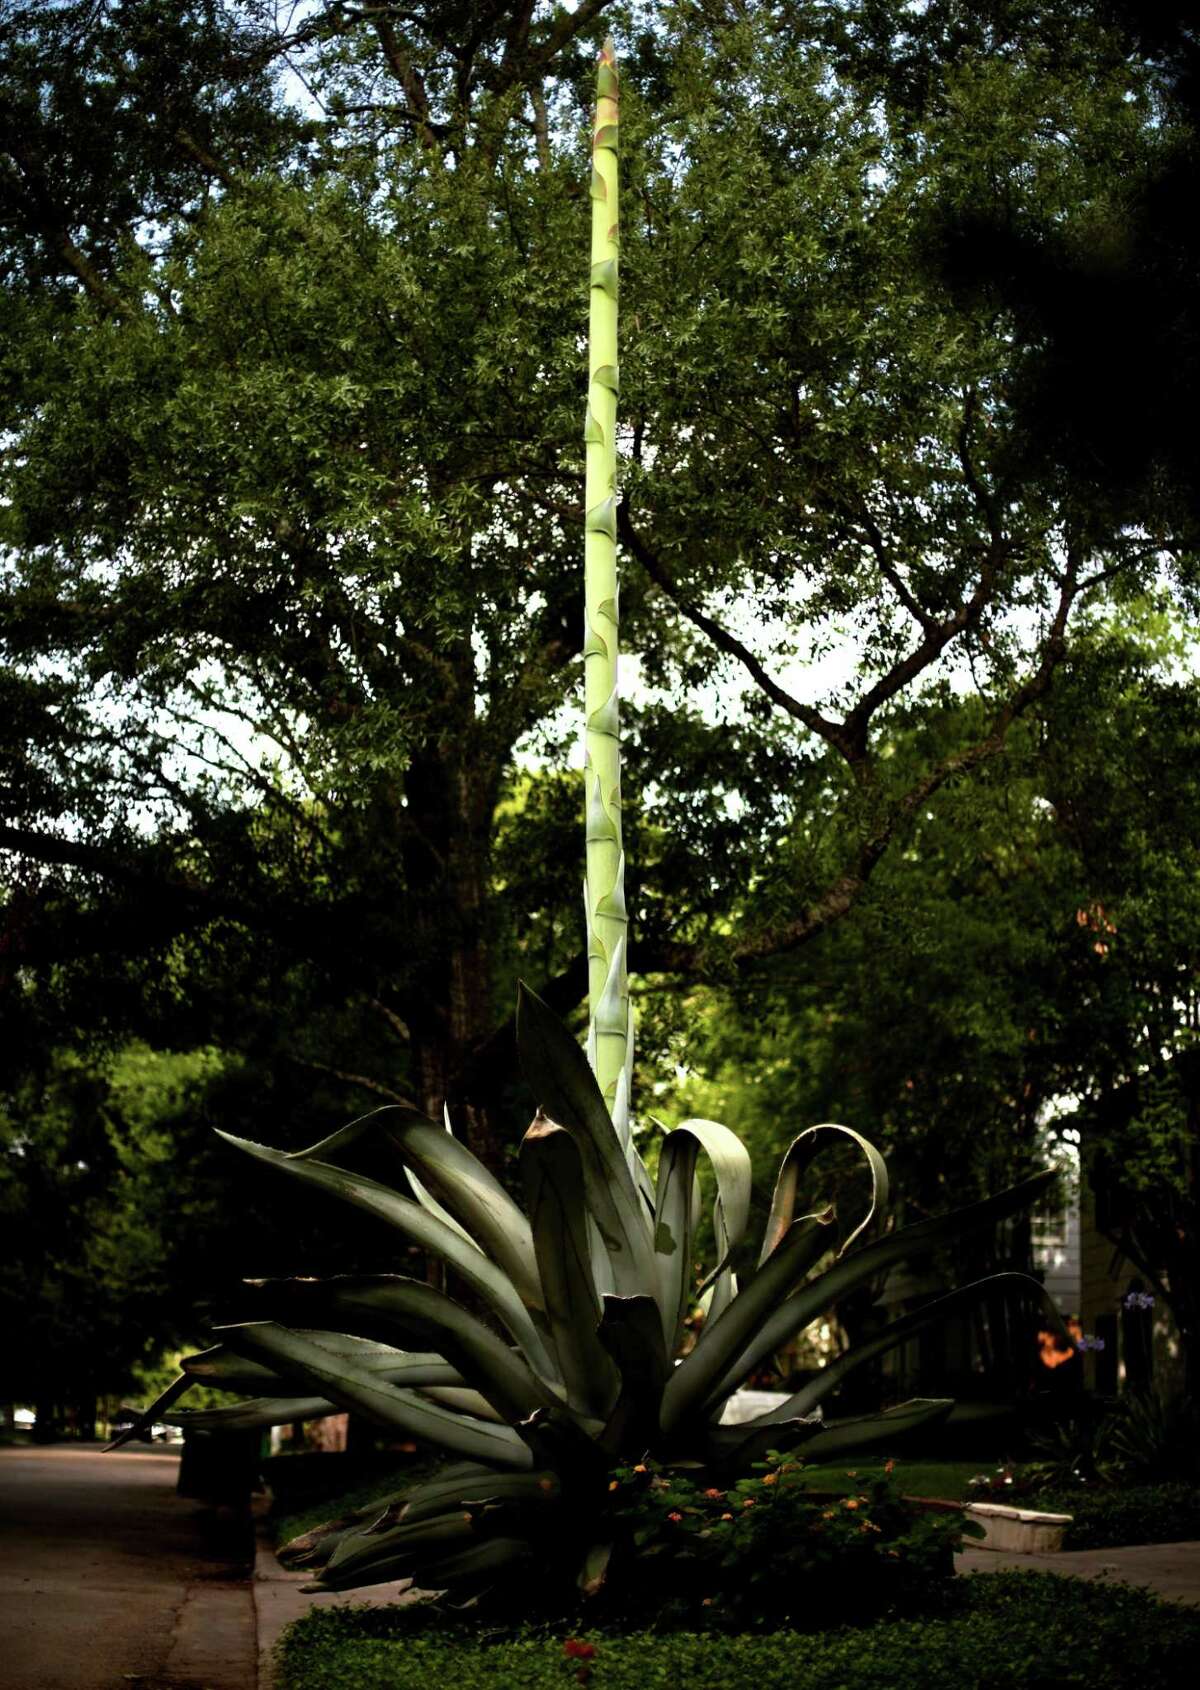 An agave americana, also known as a “century plant,” has a center stalk that has grown to 20 feet. In the next few weeks it will likely bloom and then die.